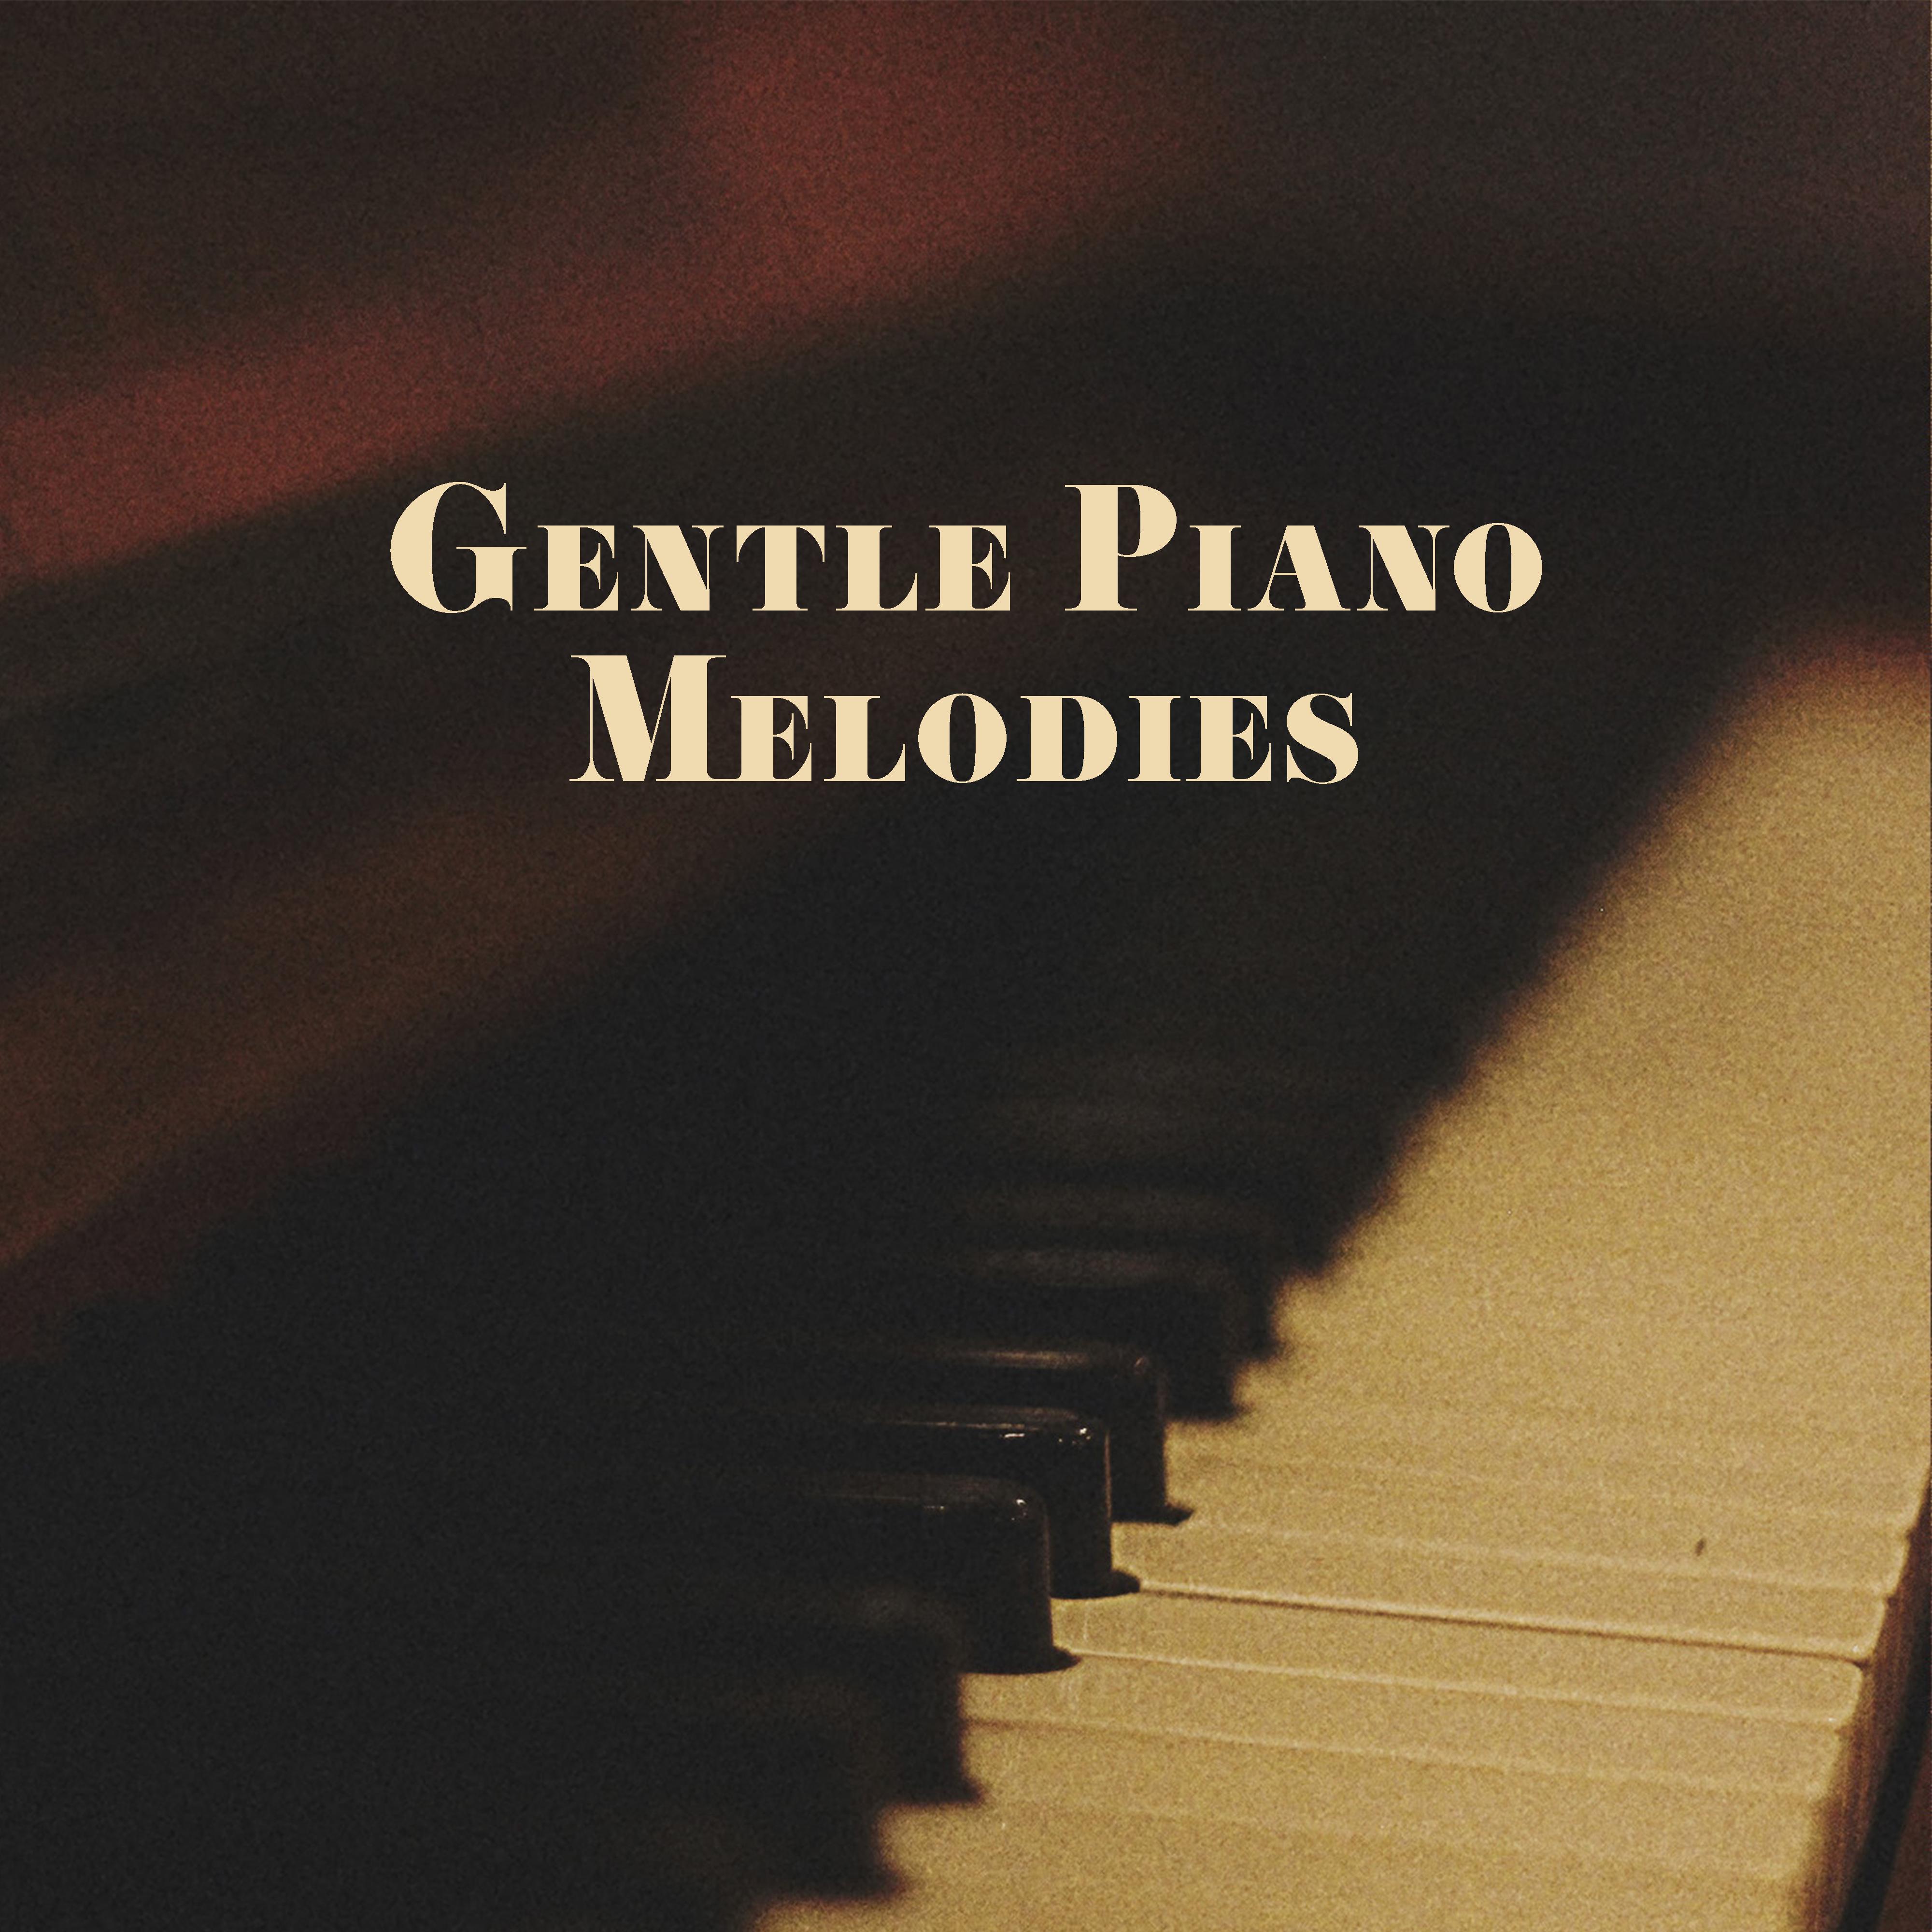 Gentle Piano Melodies